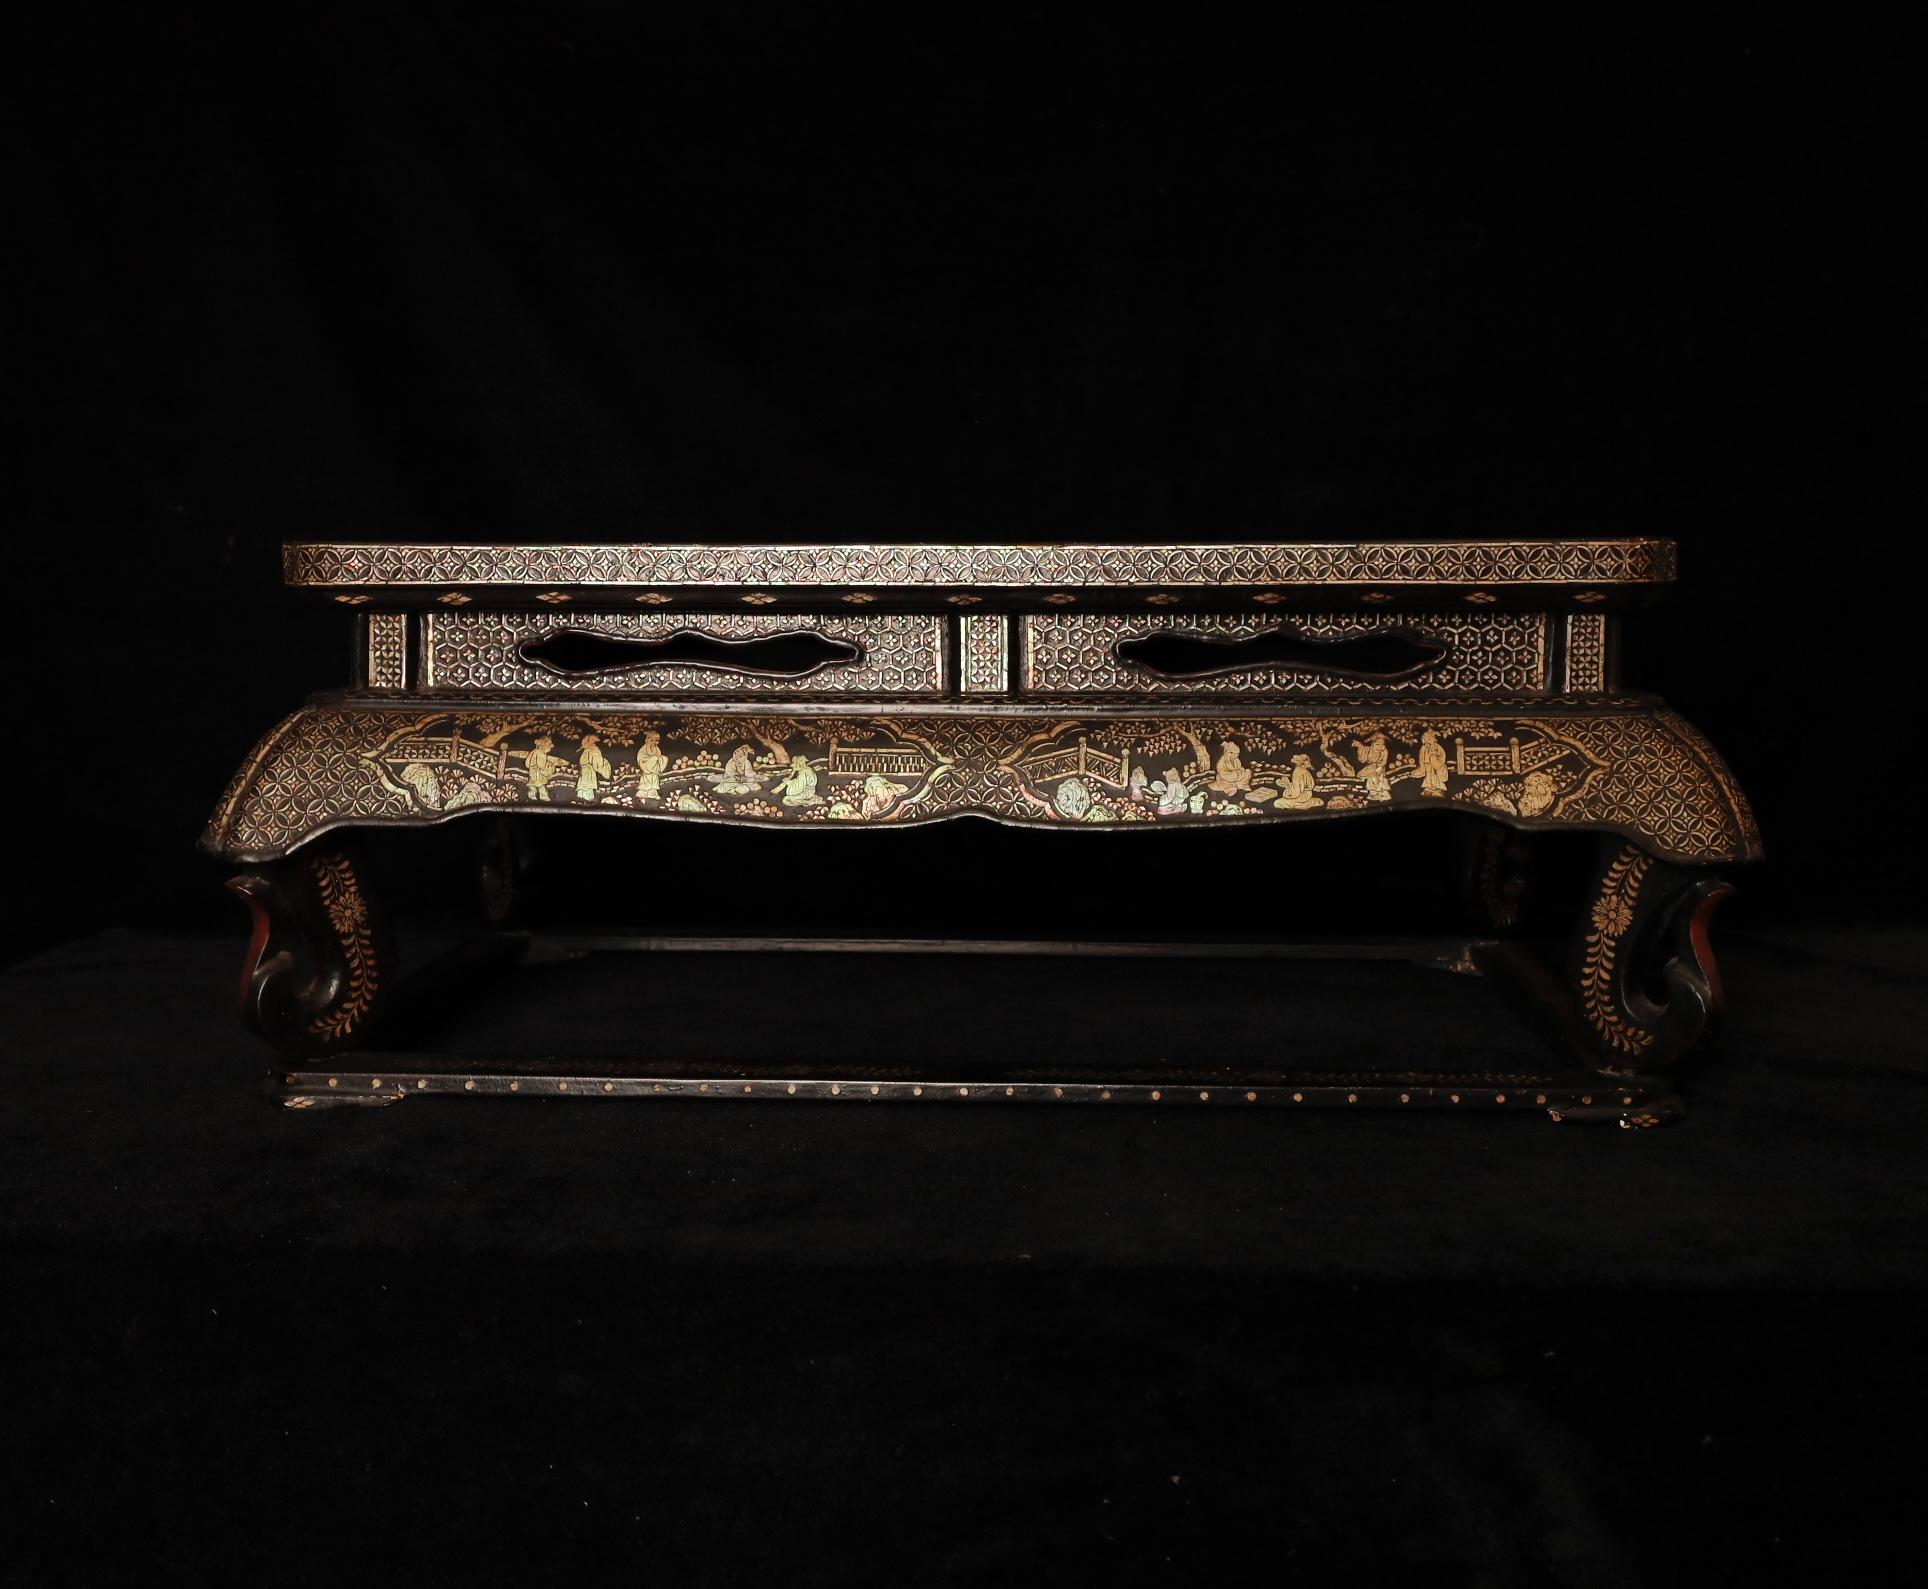 Ming Dynasty Period Scholar's Garden: Mother-of-Pearl Inlaid Lacquer Kang Table For Sale 5